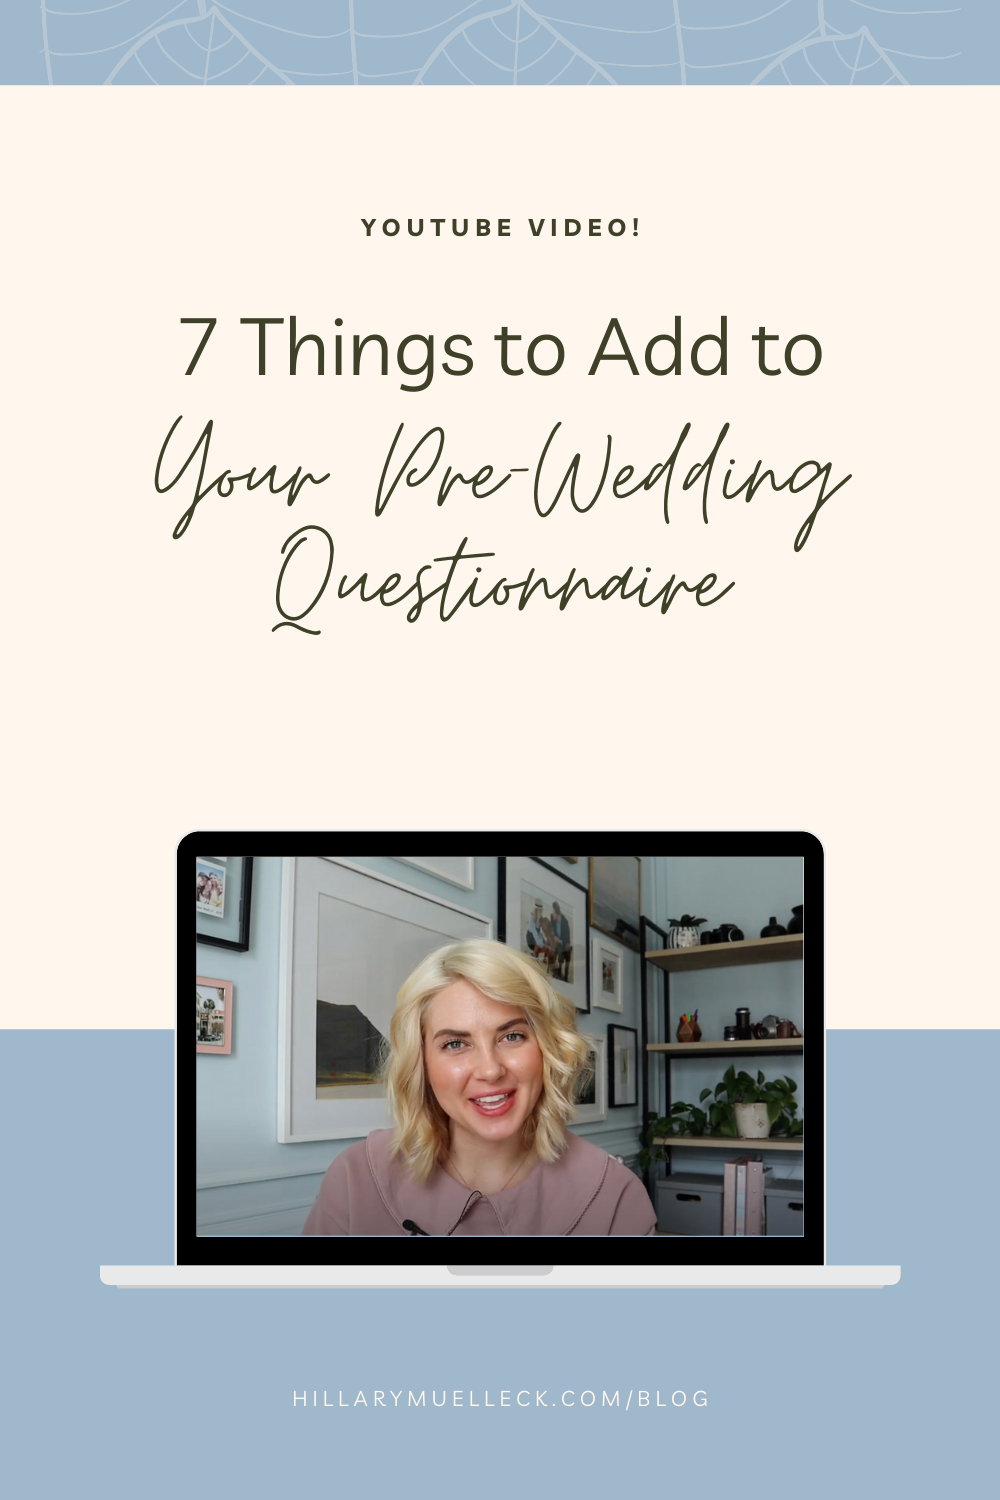 7 Things to Add to Your Pre-Wedding Questionnaire as a wedding photographer to help prepare for your wedding days